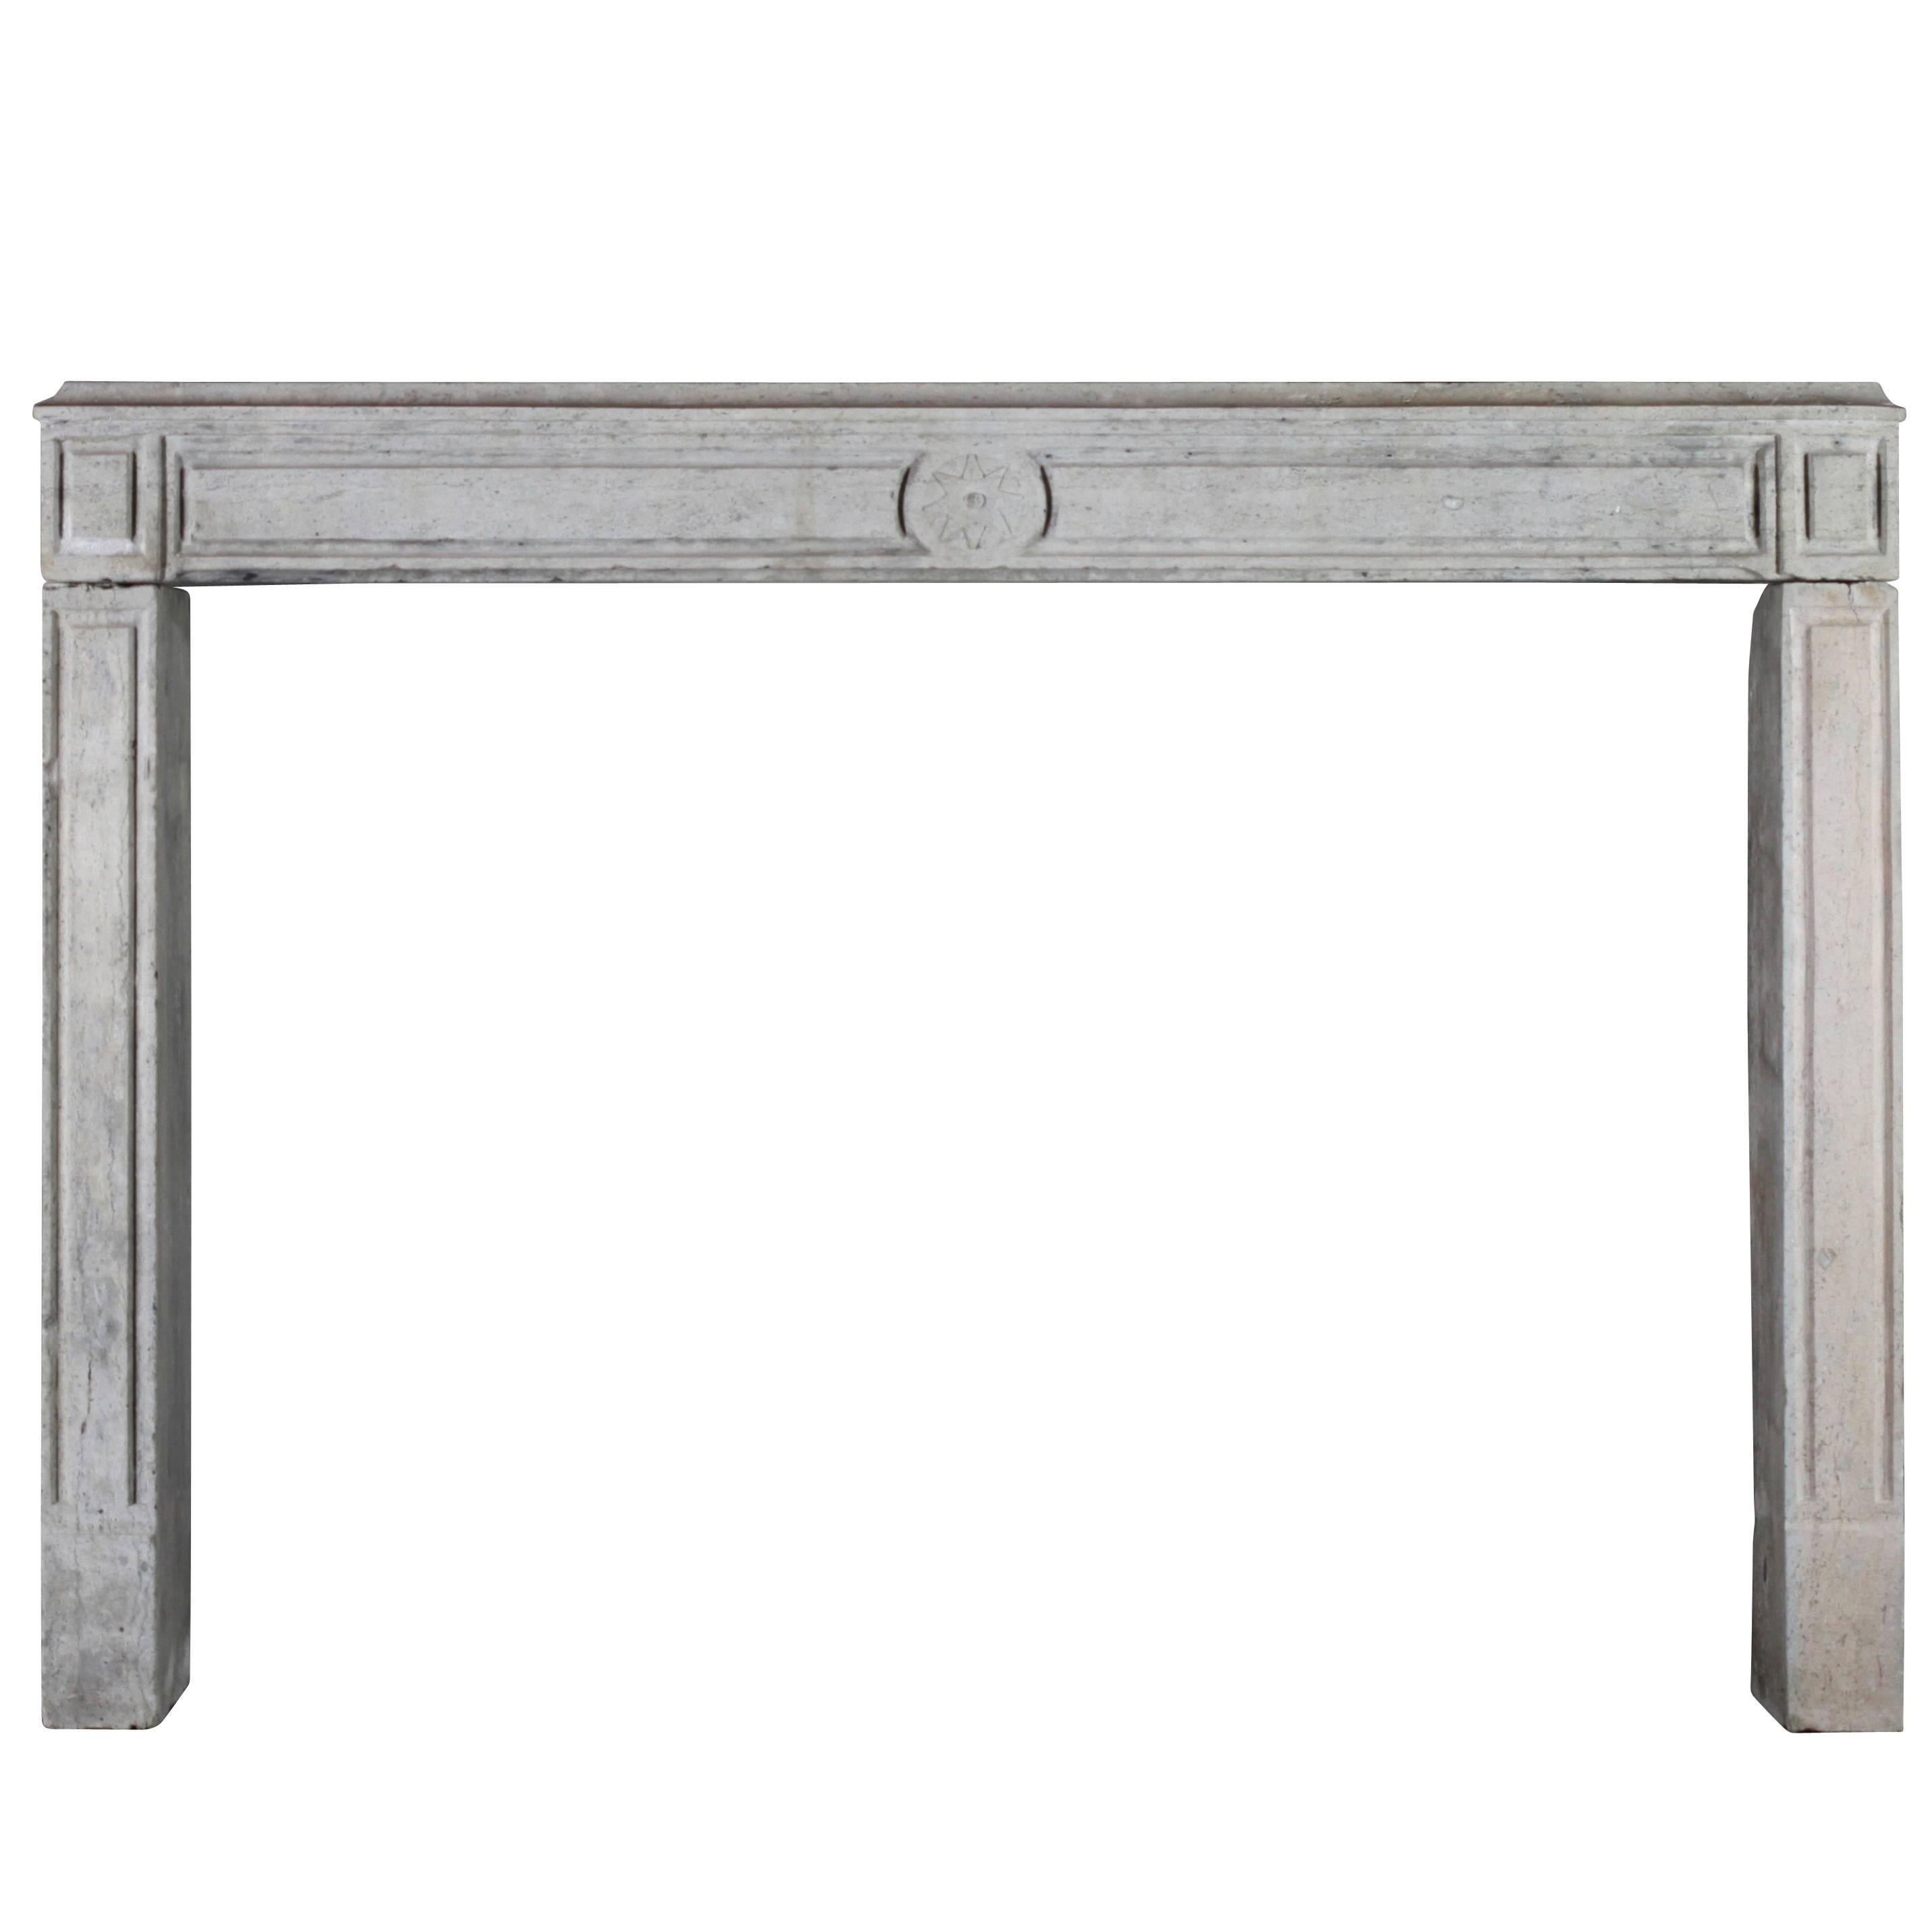 18th Century Blue Stone Classic Rustic Antique Fireplace Mantel For Sale